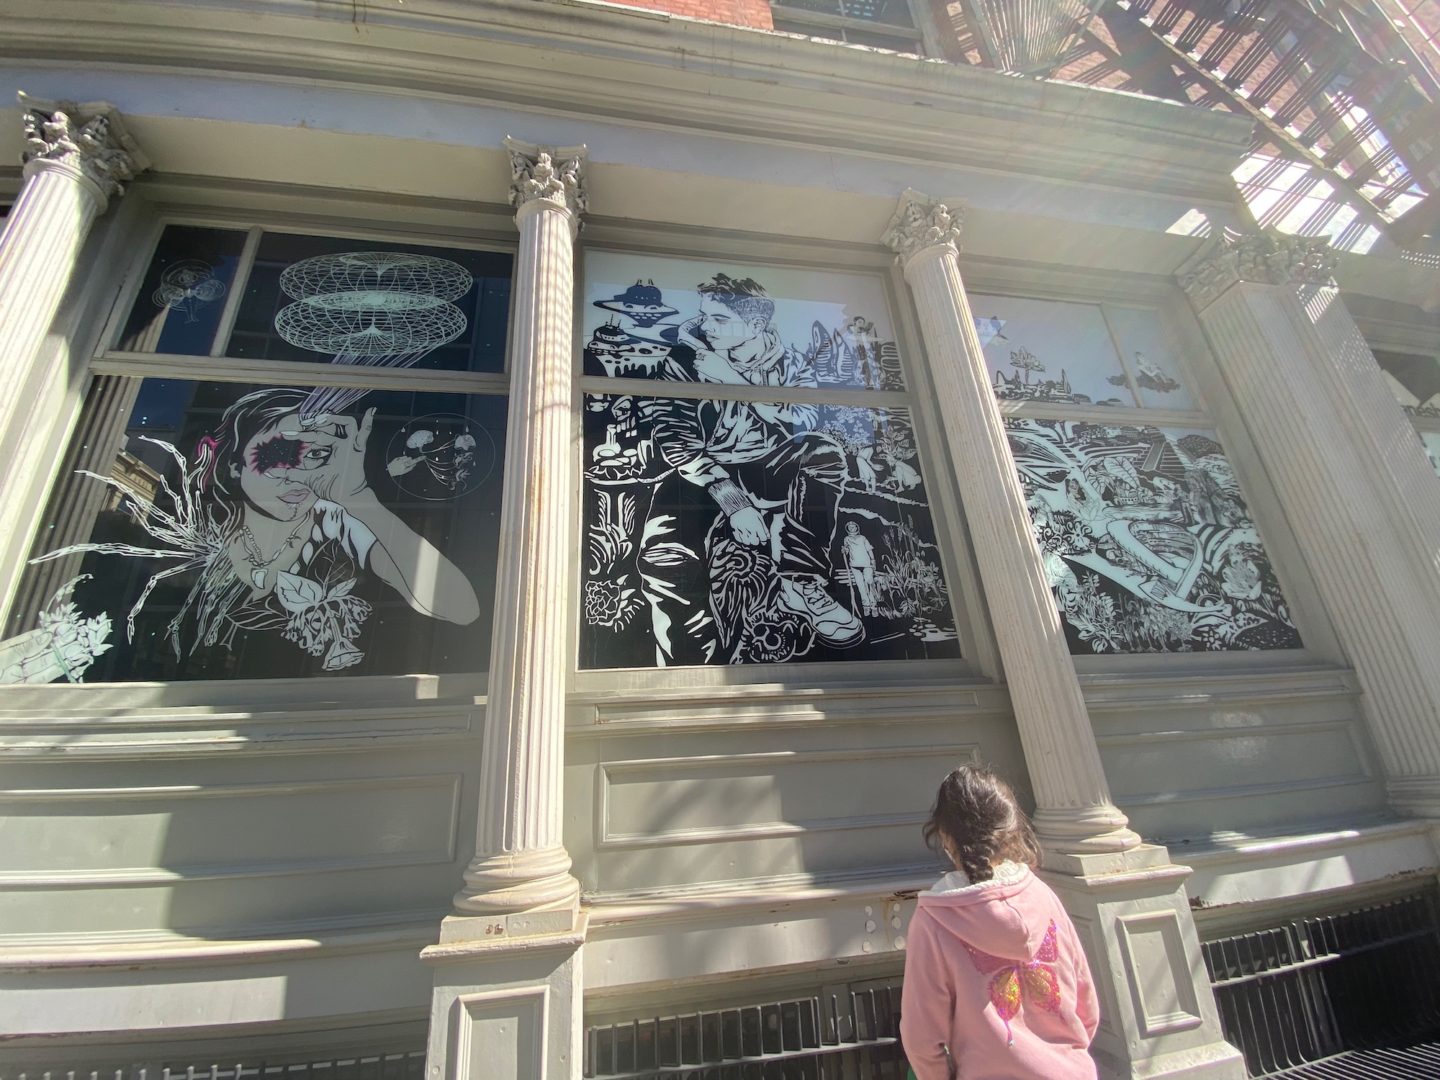 Chitra Ganesh, A city will share her secrets if you know how to ask, 2020, site-specific QUEERPOWER facade installation (closes October 18), at the Leslie-Lohman Museum of Art